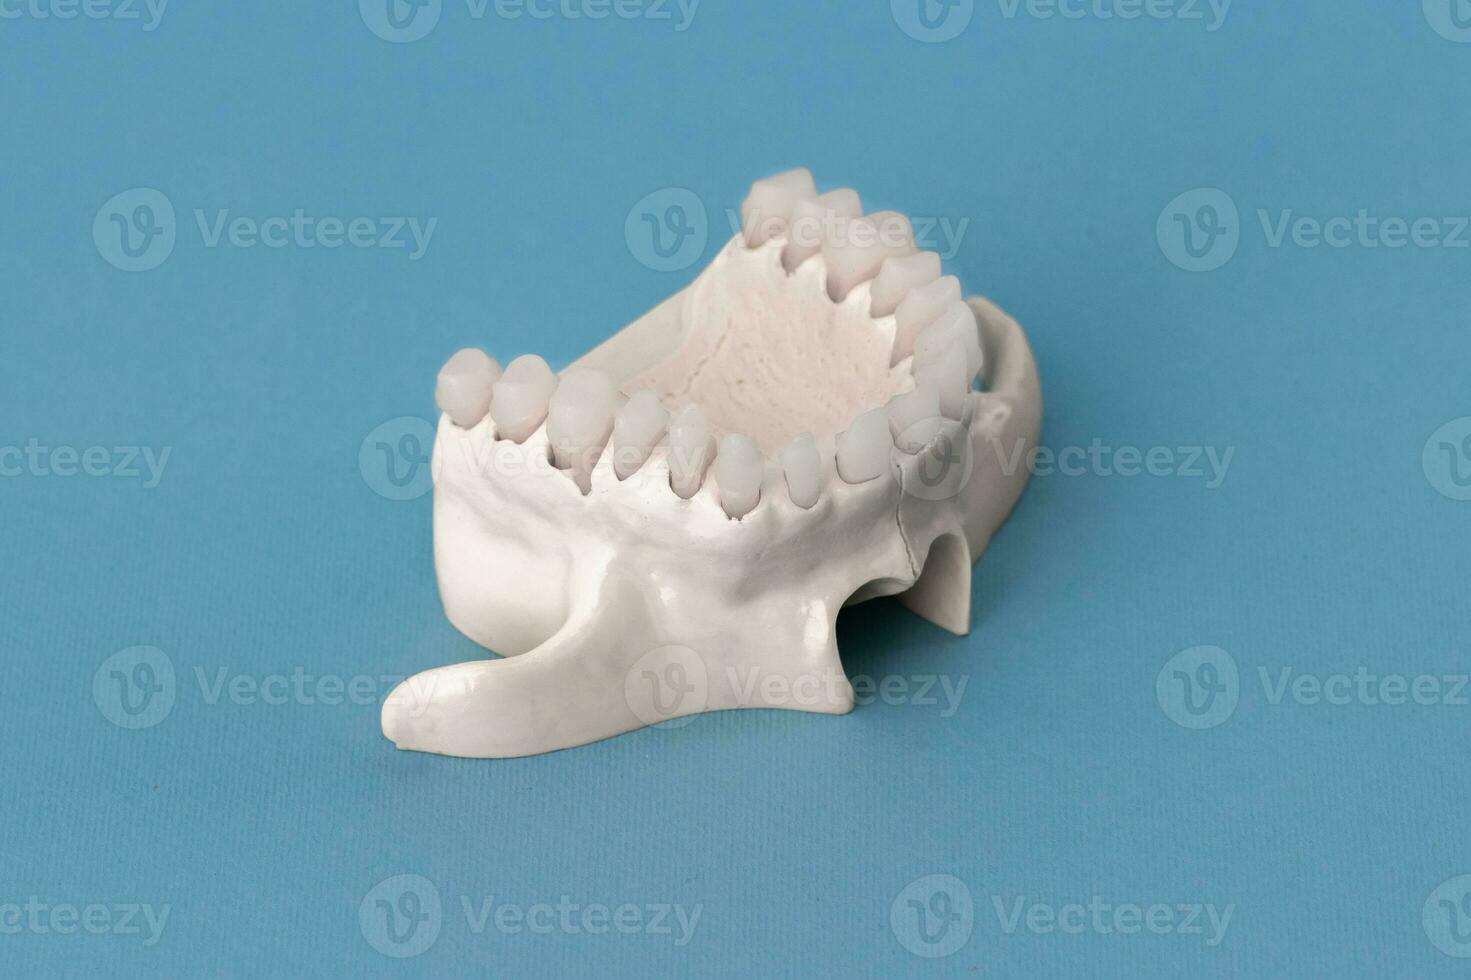 Upper human jaw with teeth anatomy model isolated on blue background. Healthy teeth, dental care and orthodontic medical concept. photo